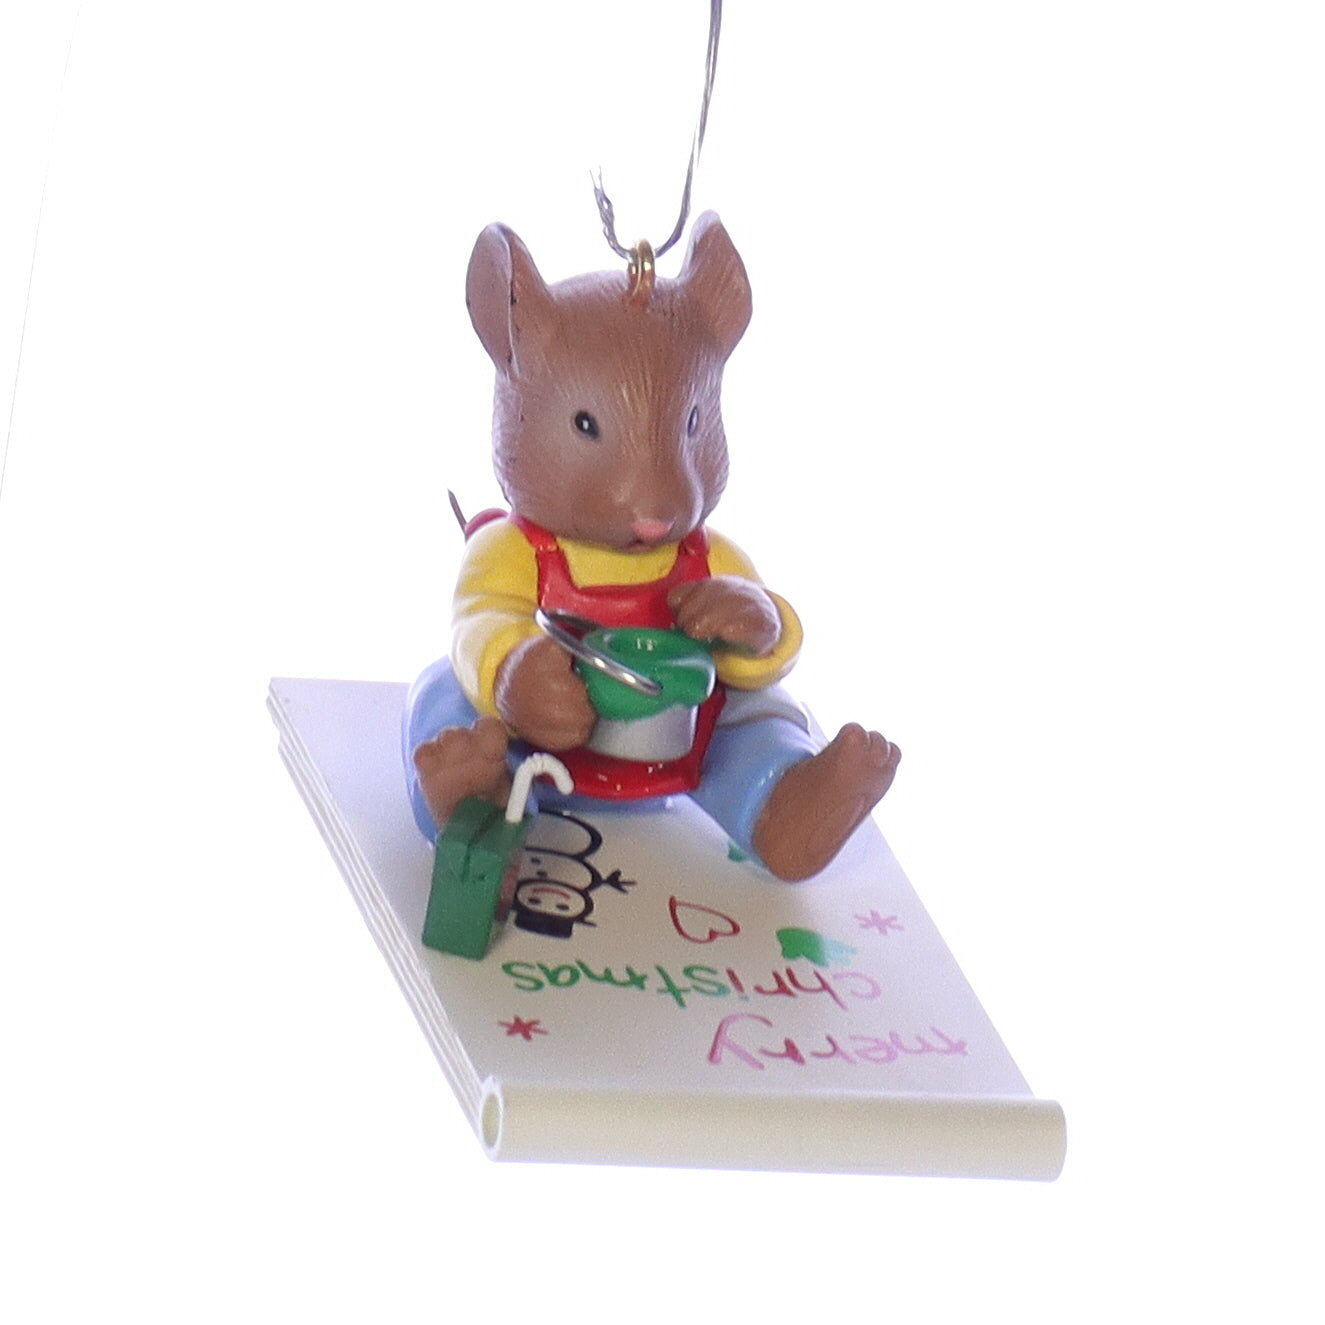 Enesco_Treasury_of_Christmas_Ornaments_595551_Paint_Your_Holiday_Bright_Mouse_Ornament_1994 Front Left View